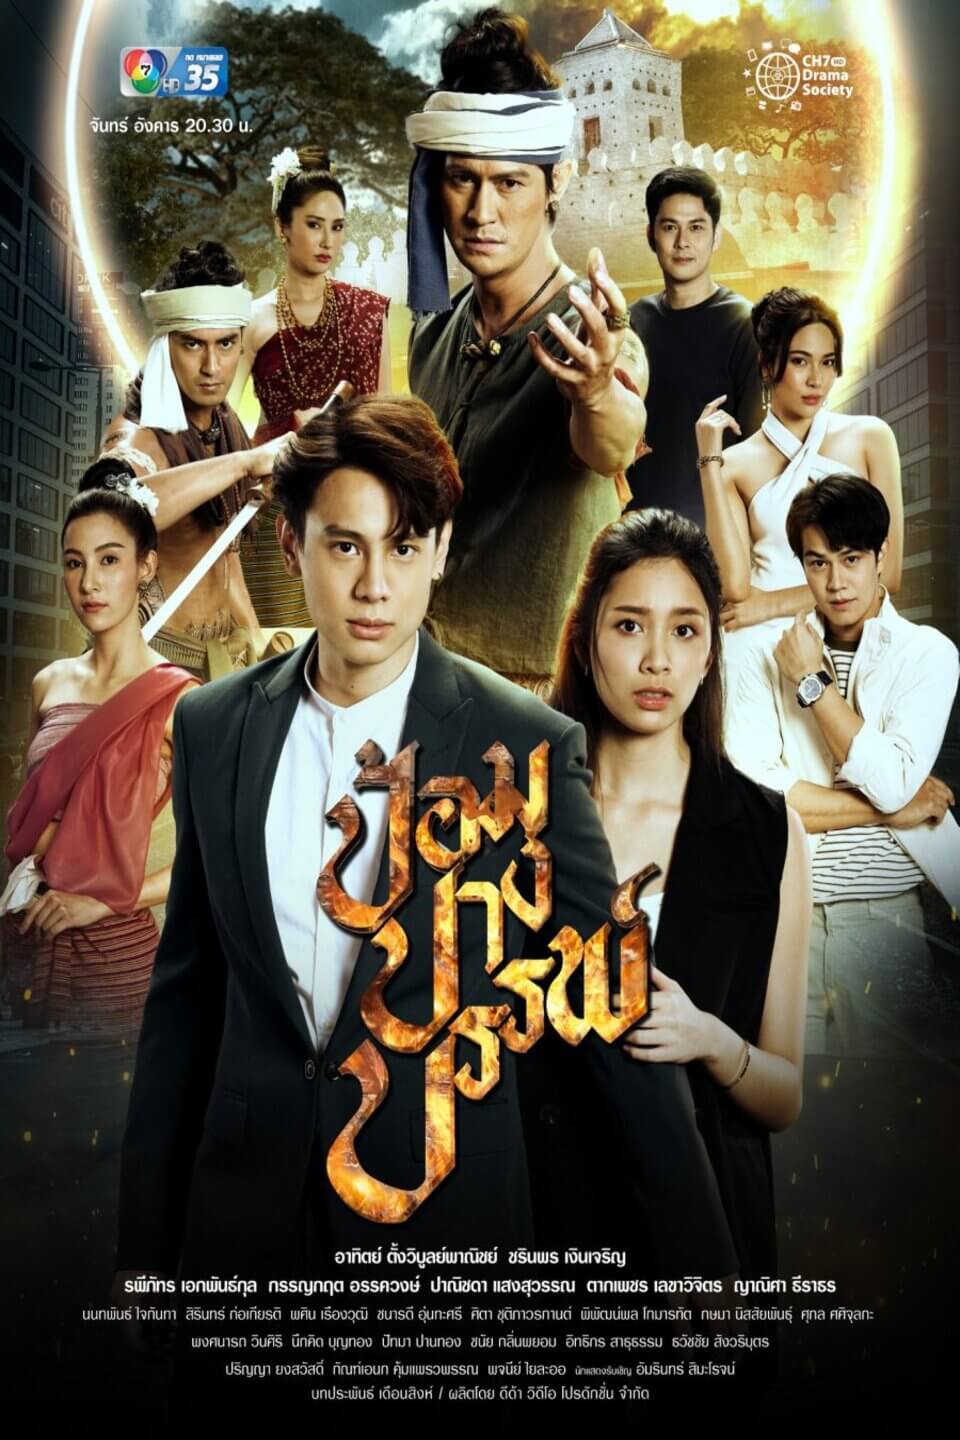 TV ratings for Pom Pang Ban (ป้อมปางบรรพ์) in South Korea. Channel 7 TV series